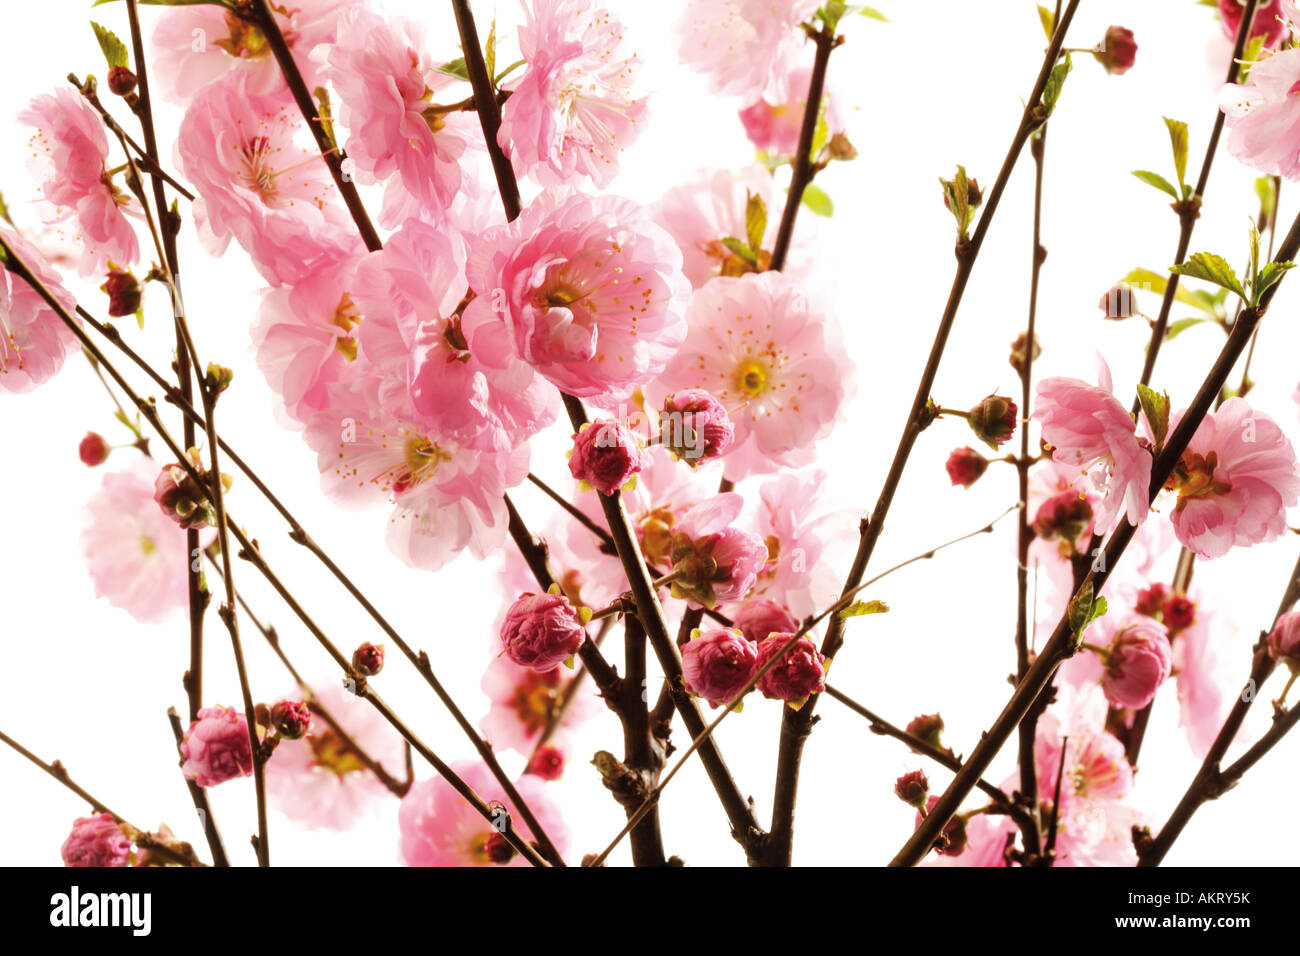 Almond tree twigs with blossoms (Prunus triloba), close-up Stock Photo